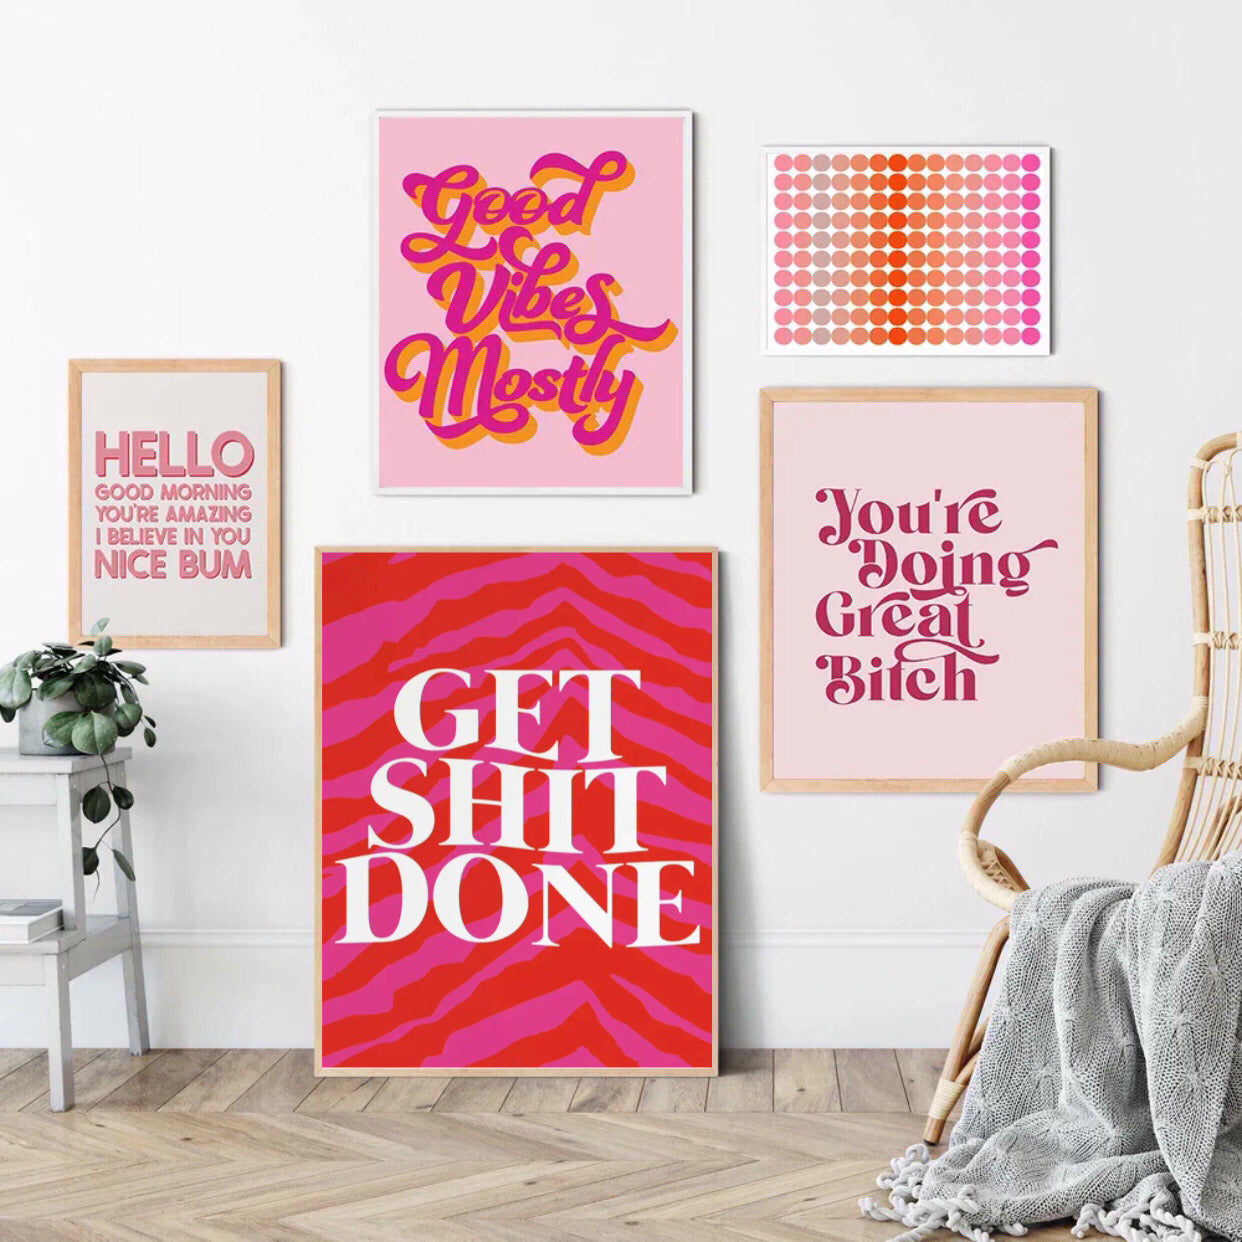 "get shit done" poster